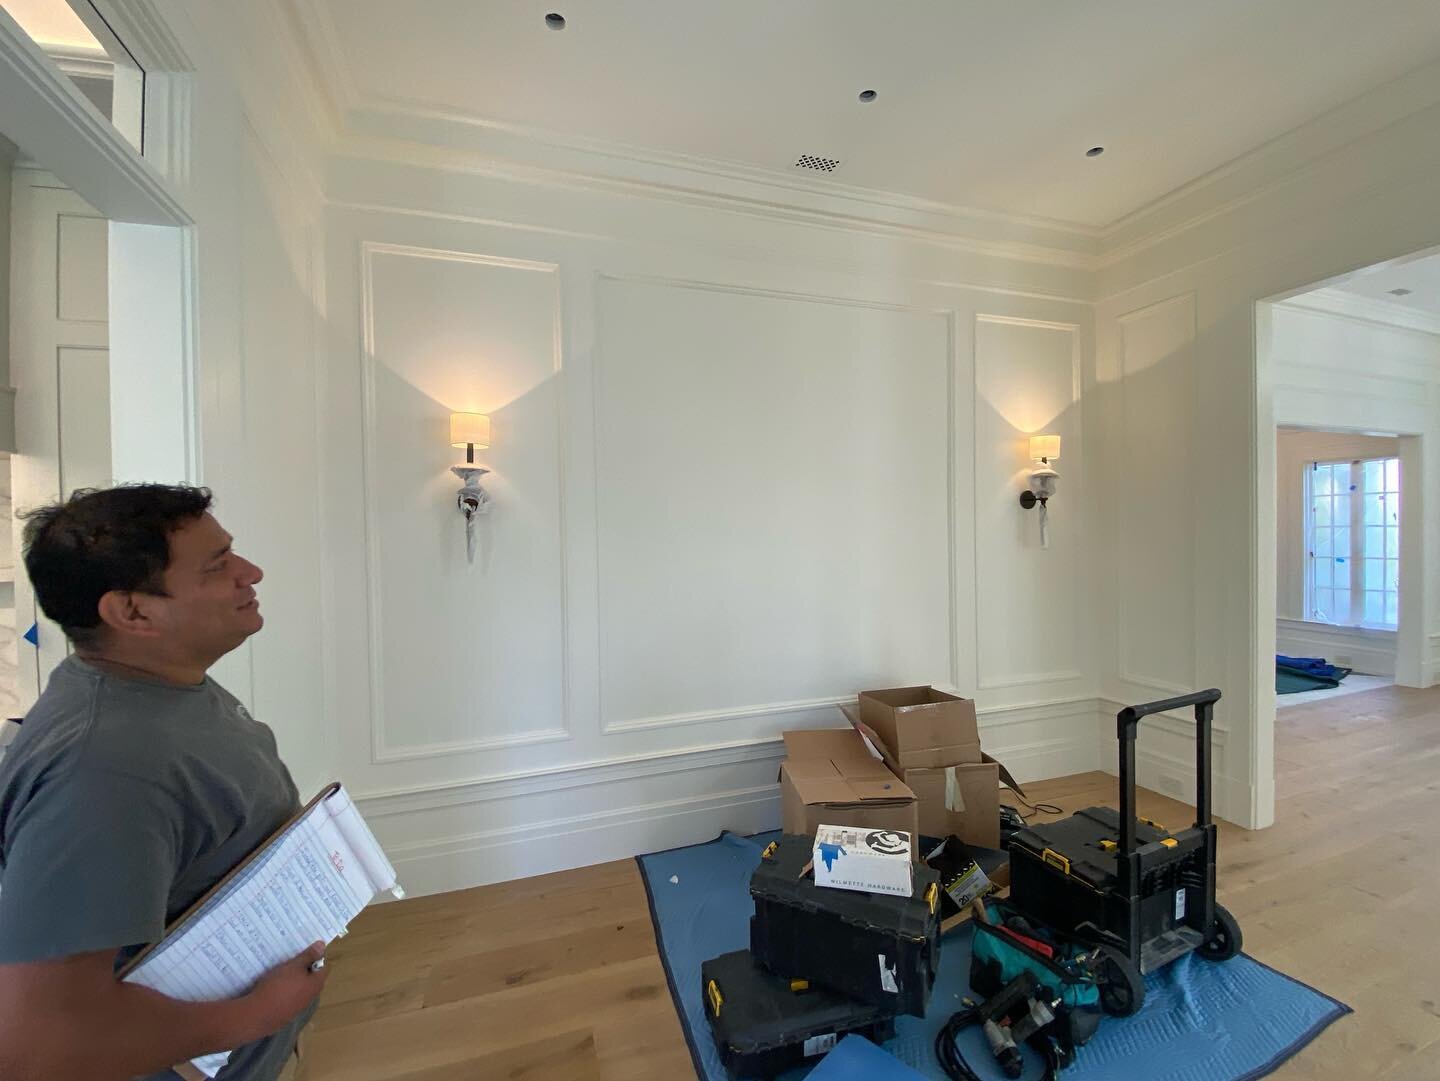 Gerbert contemplates the nearing move-in date of this Pacific Heights remodel. #sanfranciscocontractor #sfbuilders #sfcontractors #sanfranciscoremodel